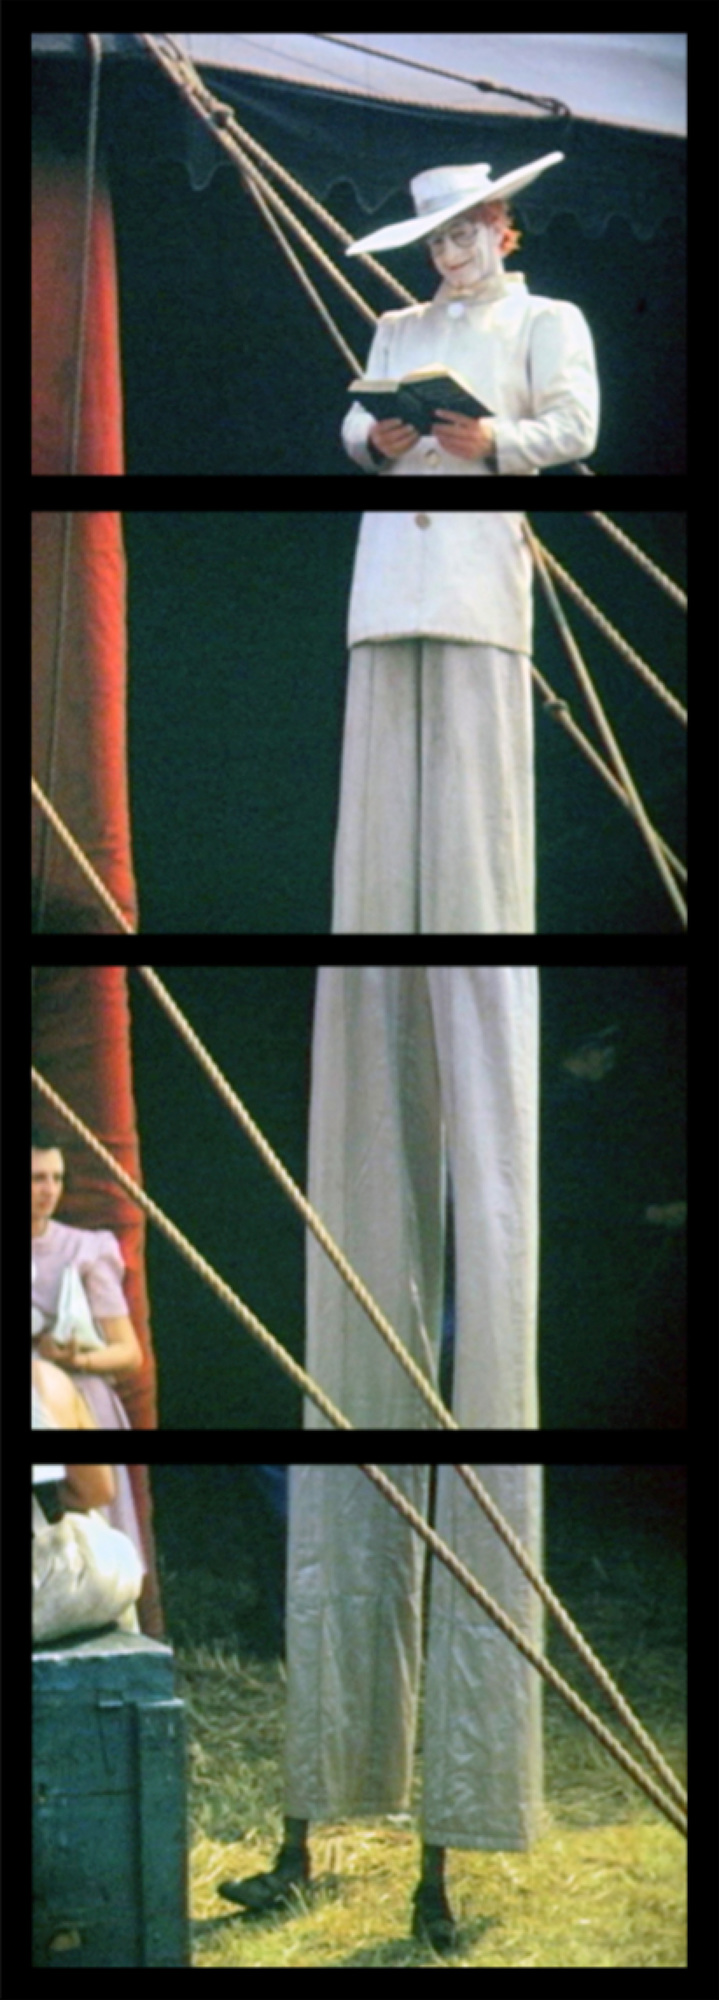  One of the five sequences that will be on display at the exhibit shows a stilt man reading before a performance. A sequence is what Siegfried calls a larger image composed of multiple smaller images. Photos by Elizabeth Chapin.